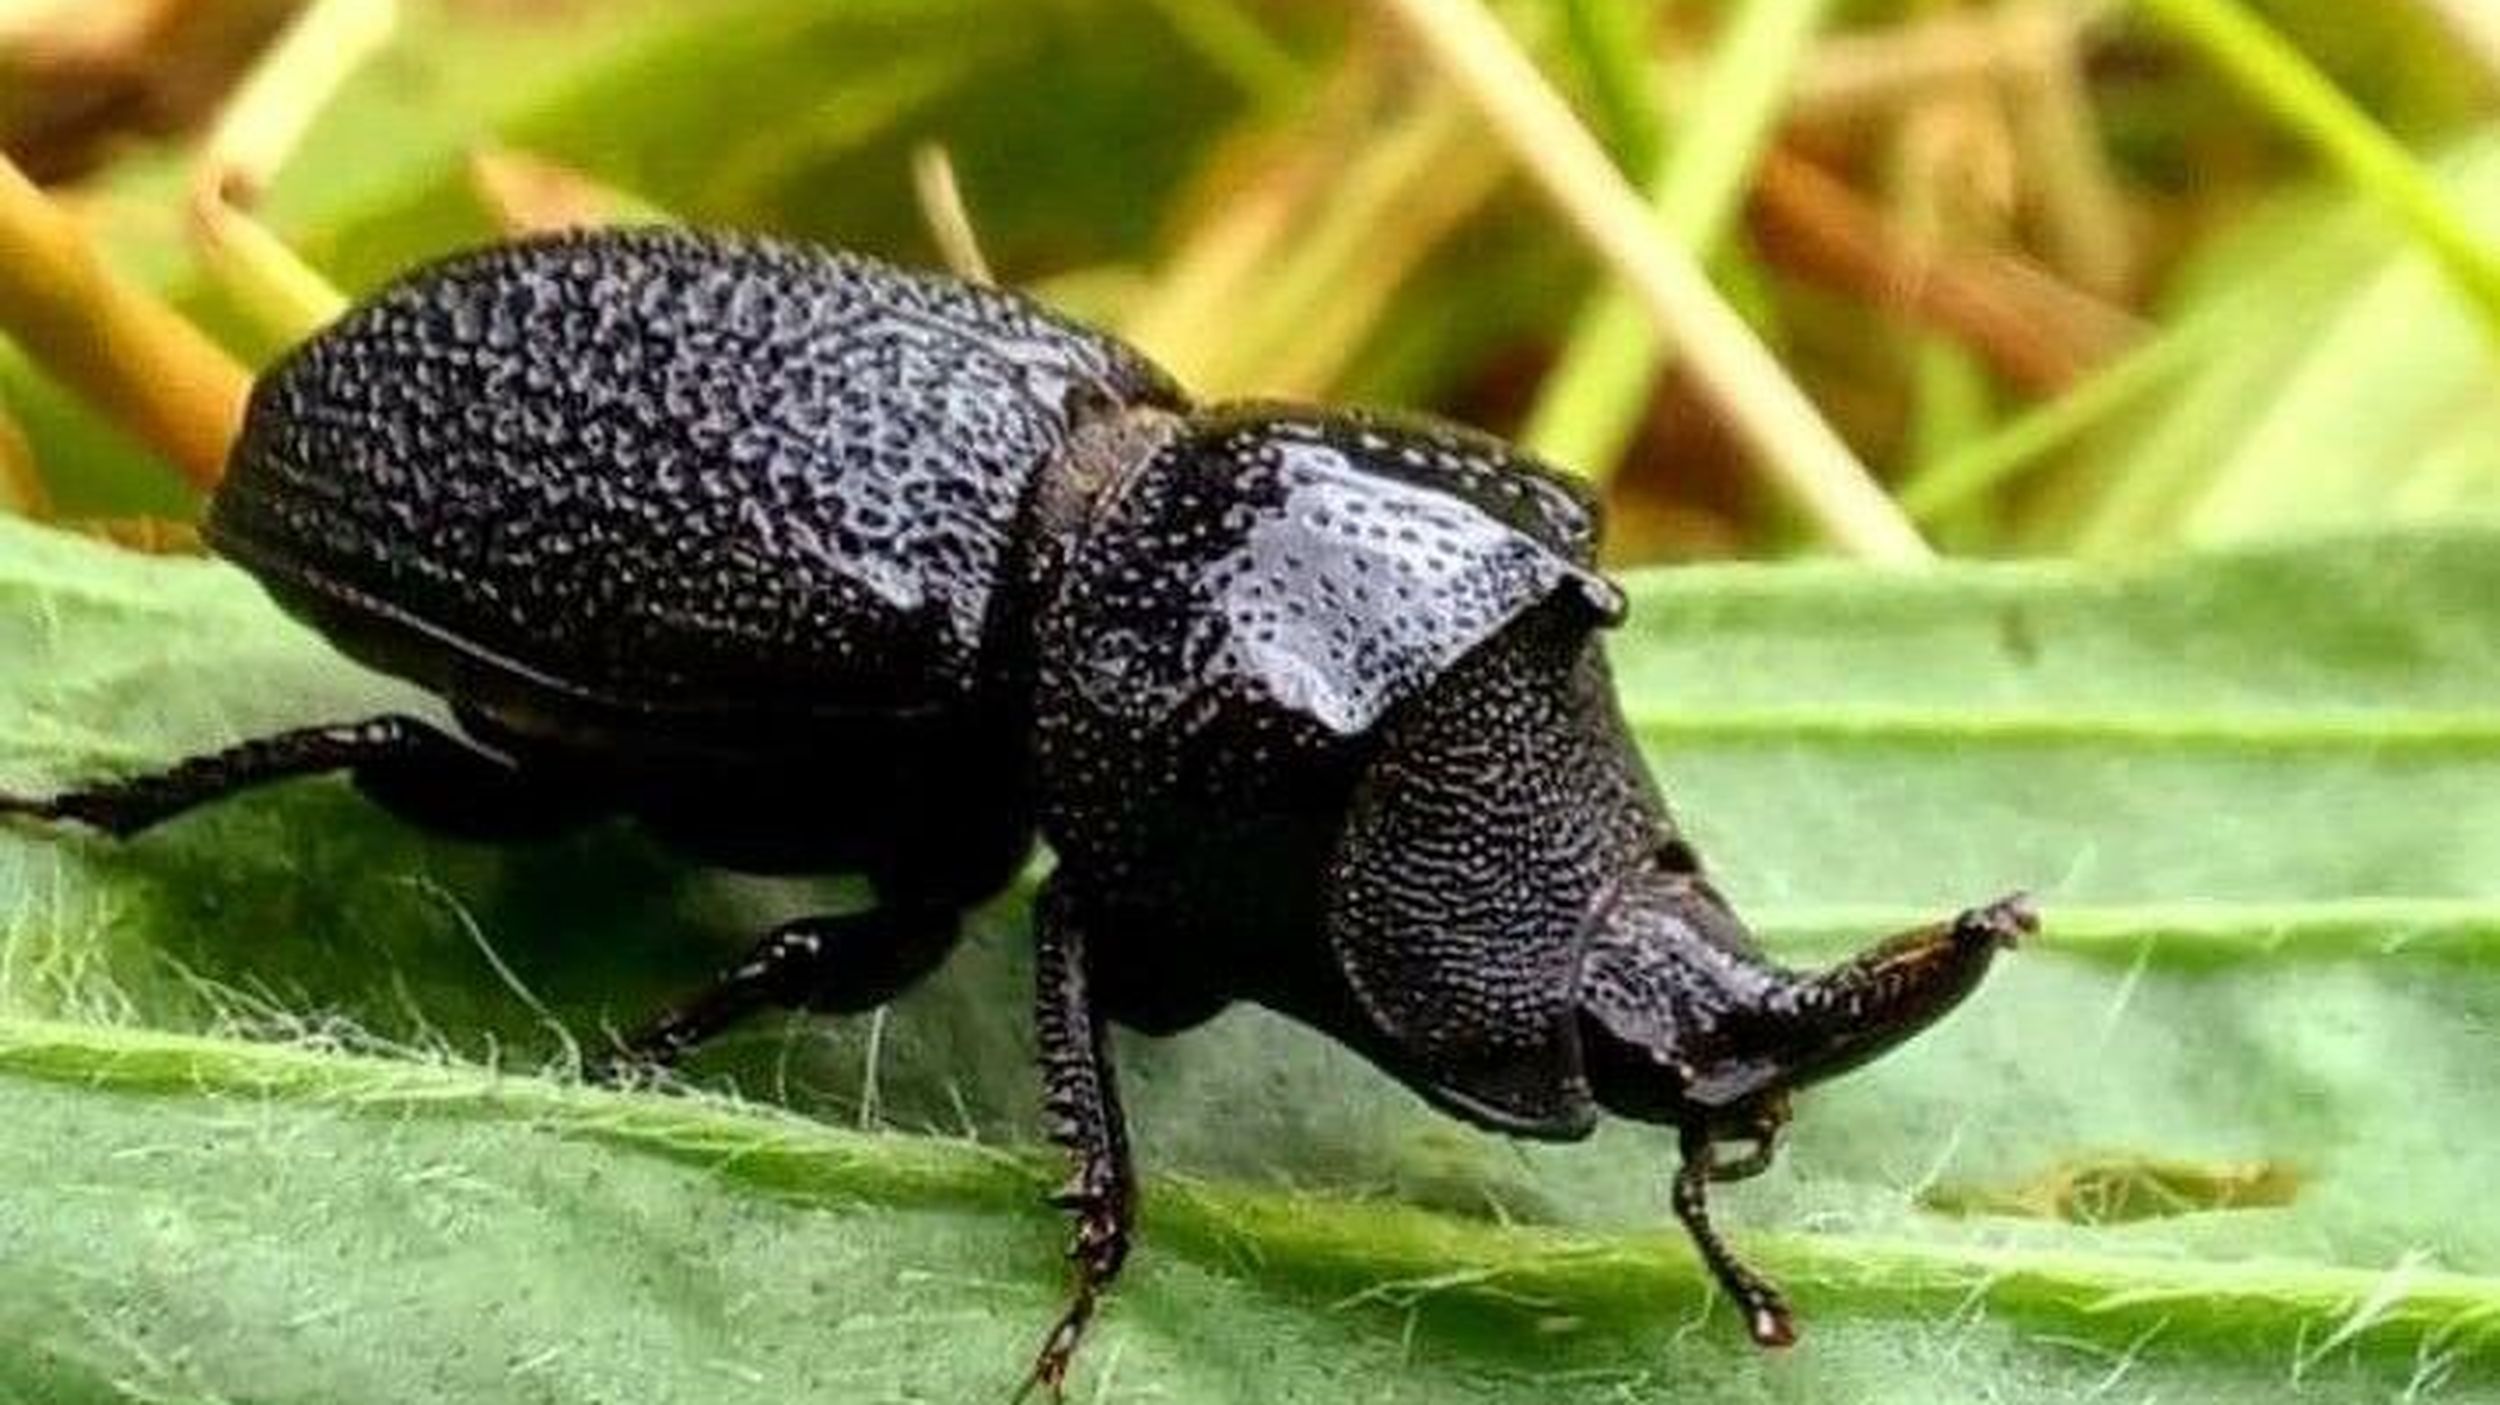 Bugging the Northwest: Meet the beetle that's 'not a problem